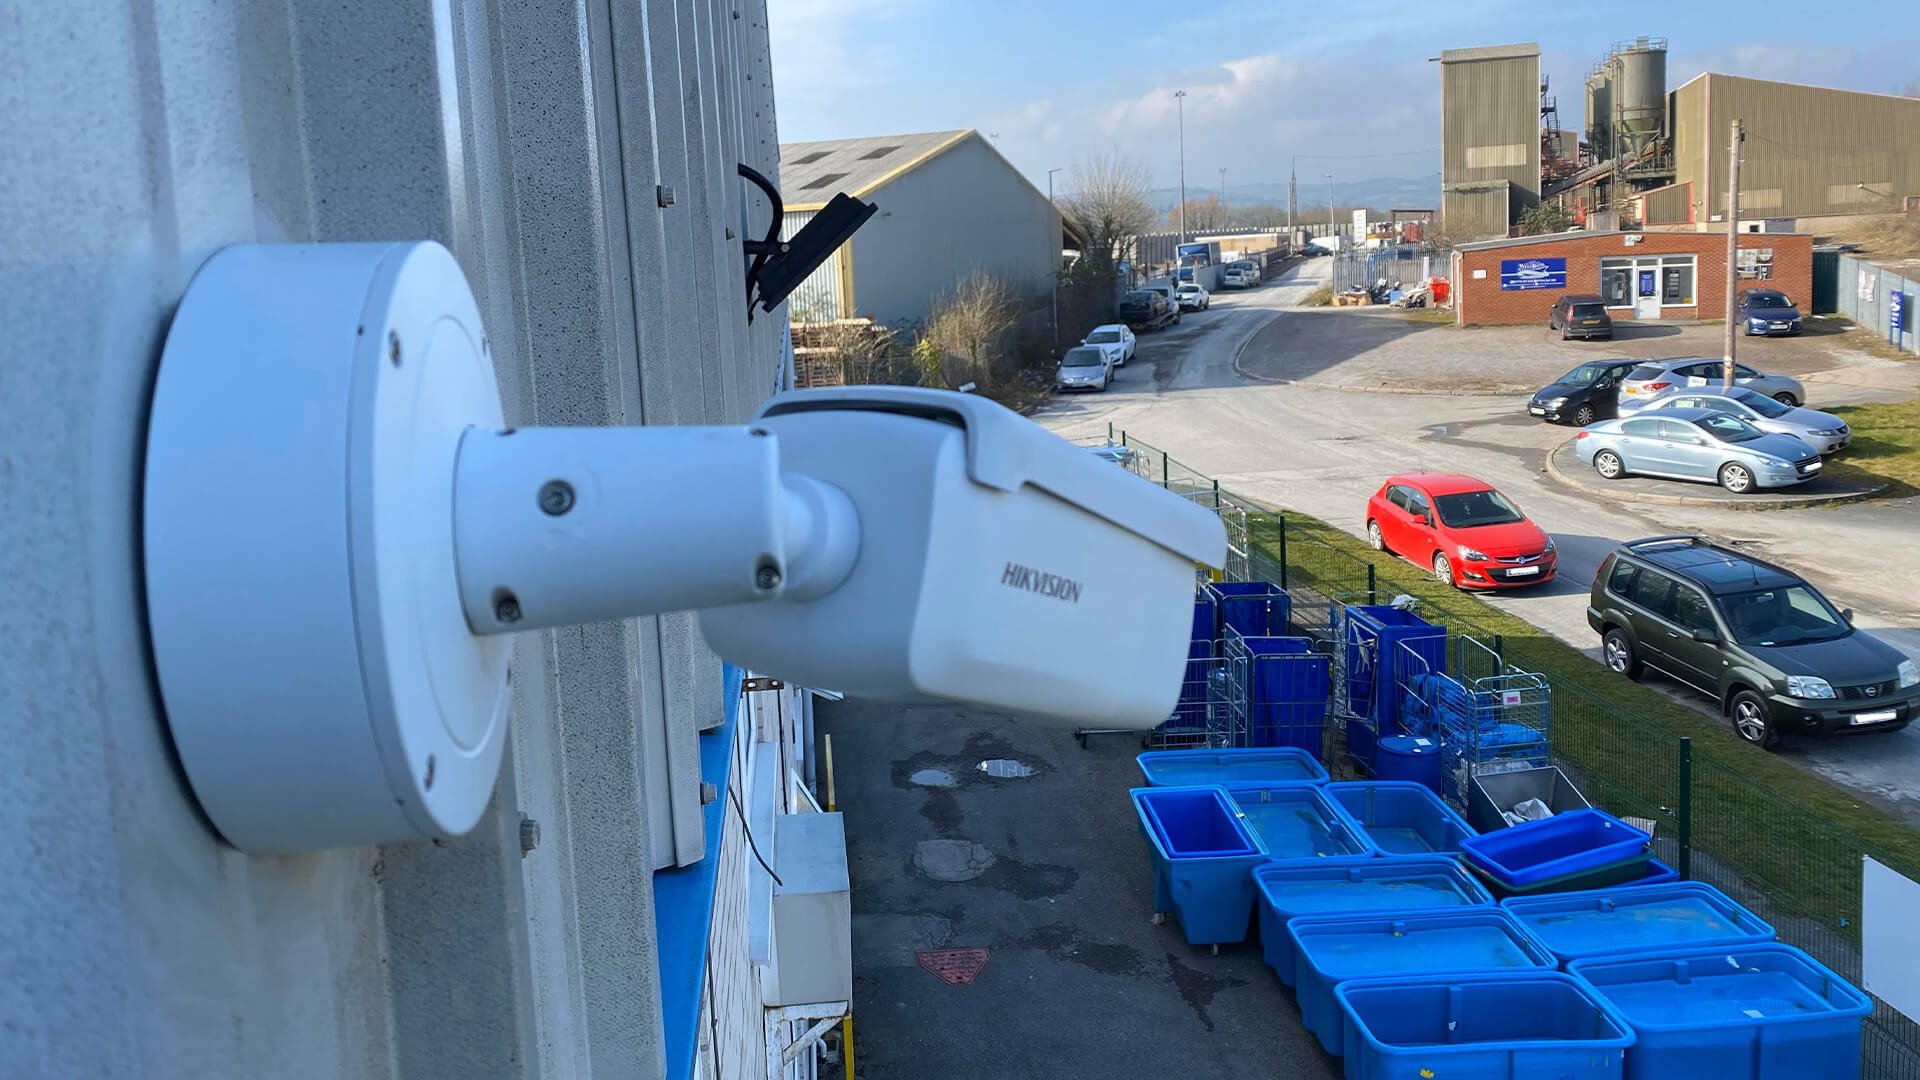 7 Reasons Why Your Business Needs CCTV